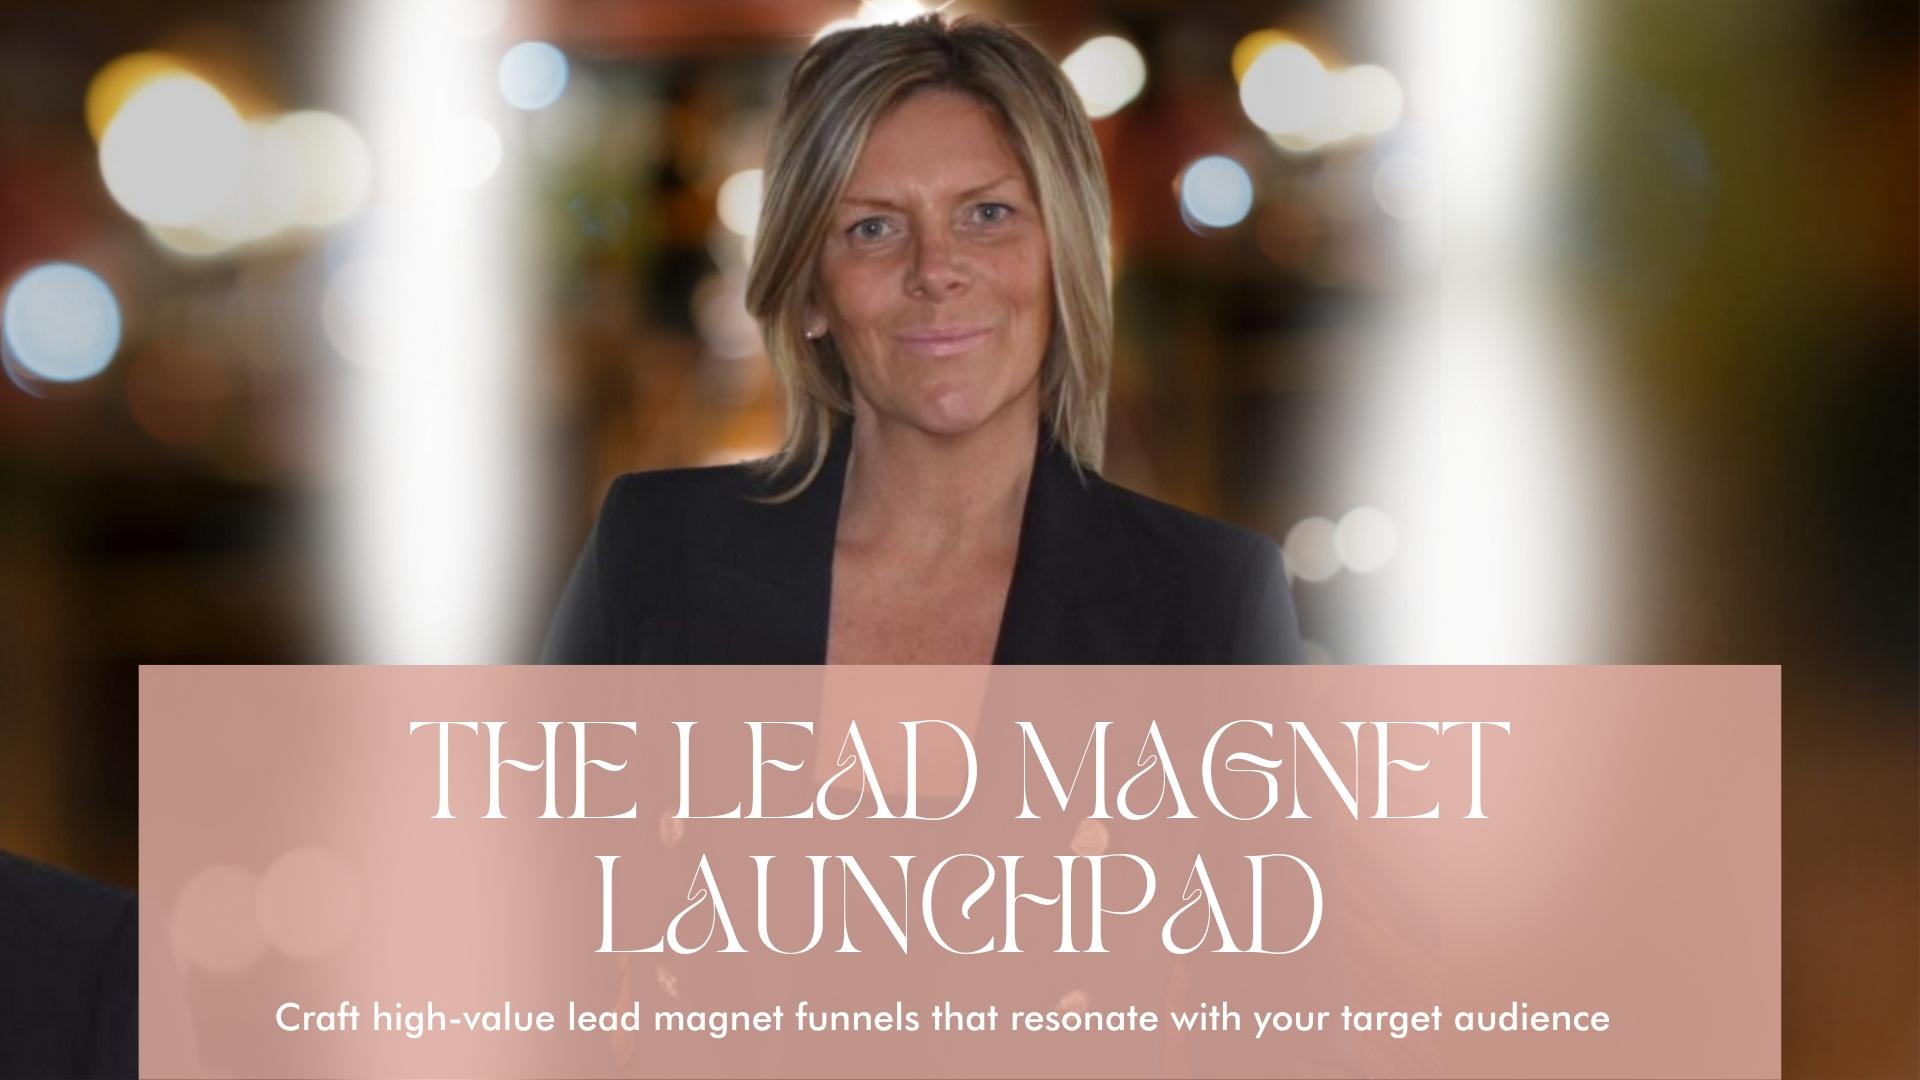 LEAD MAGNET LAUNCHPAD COURSE